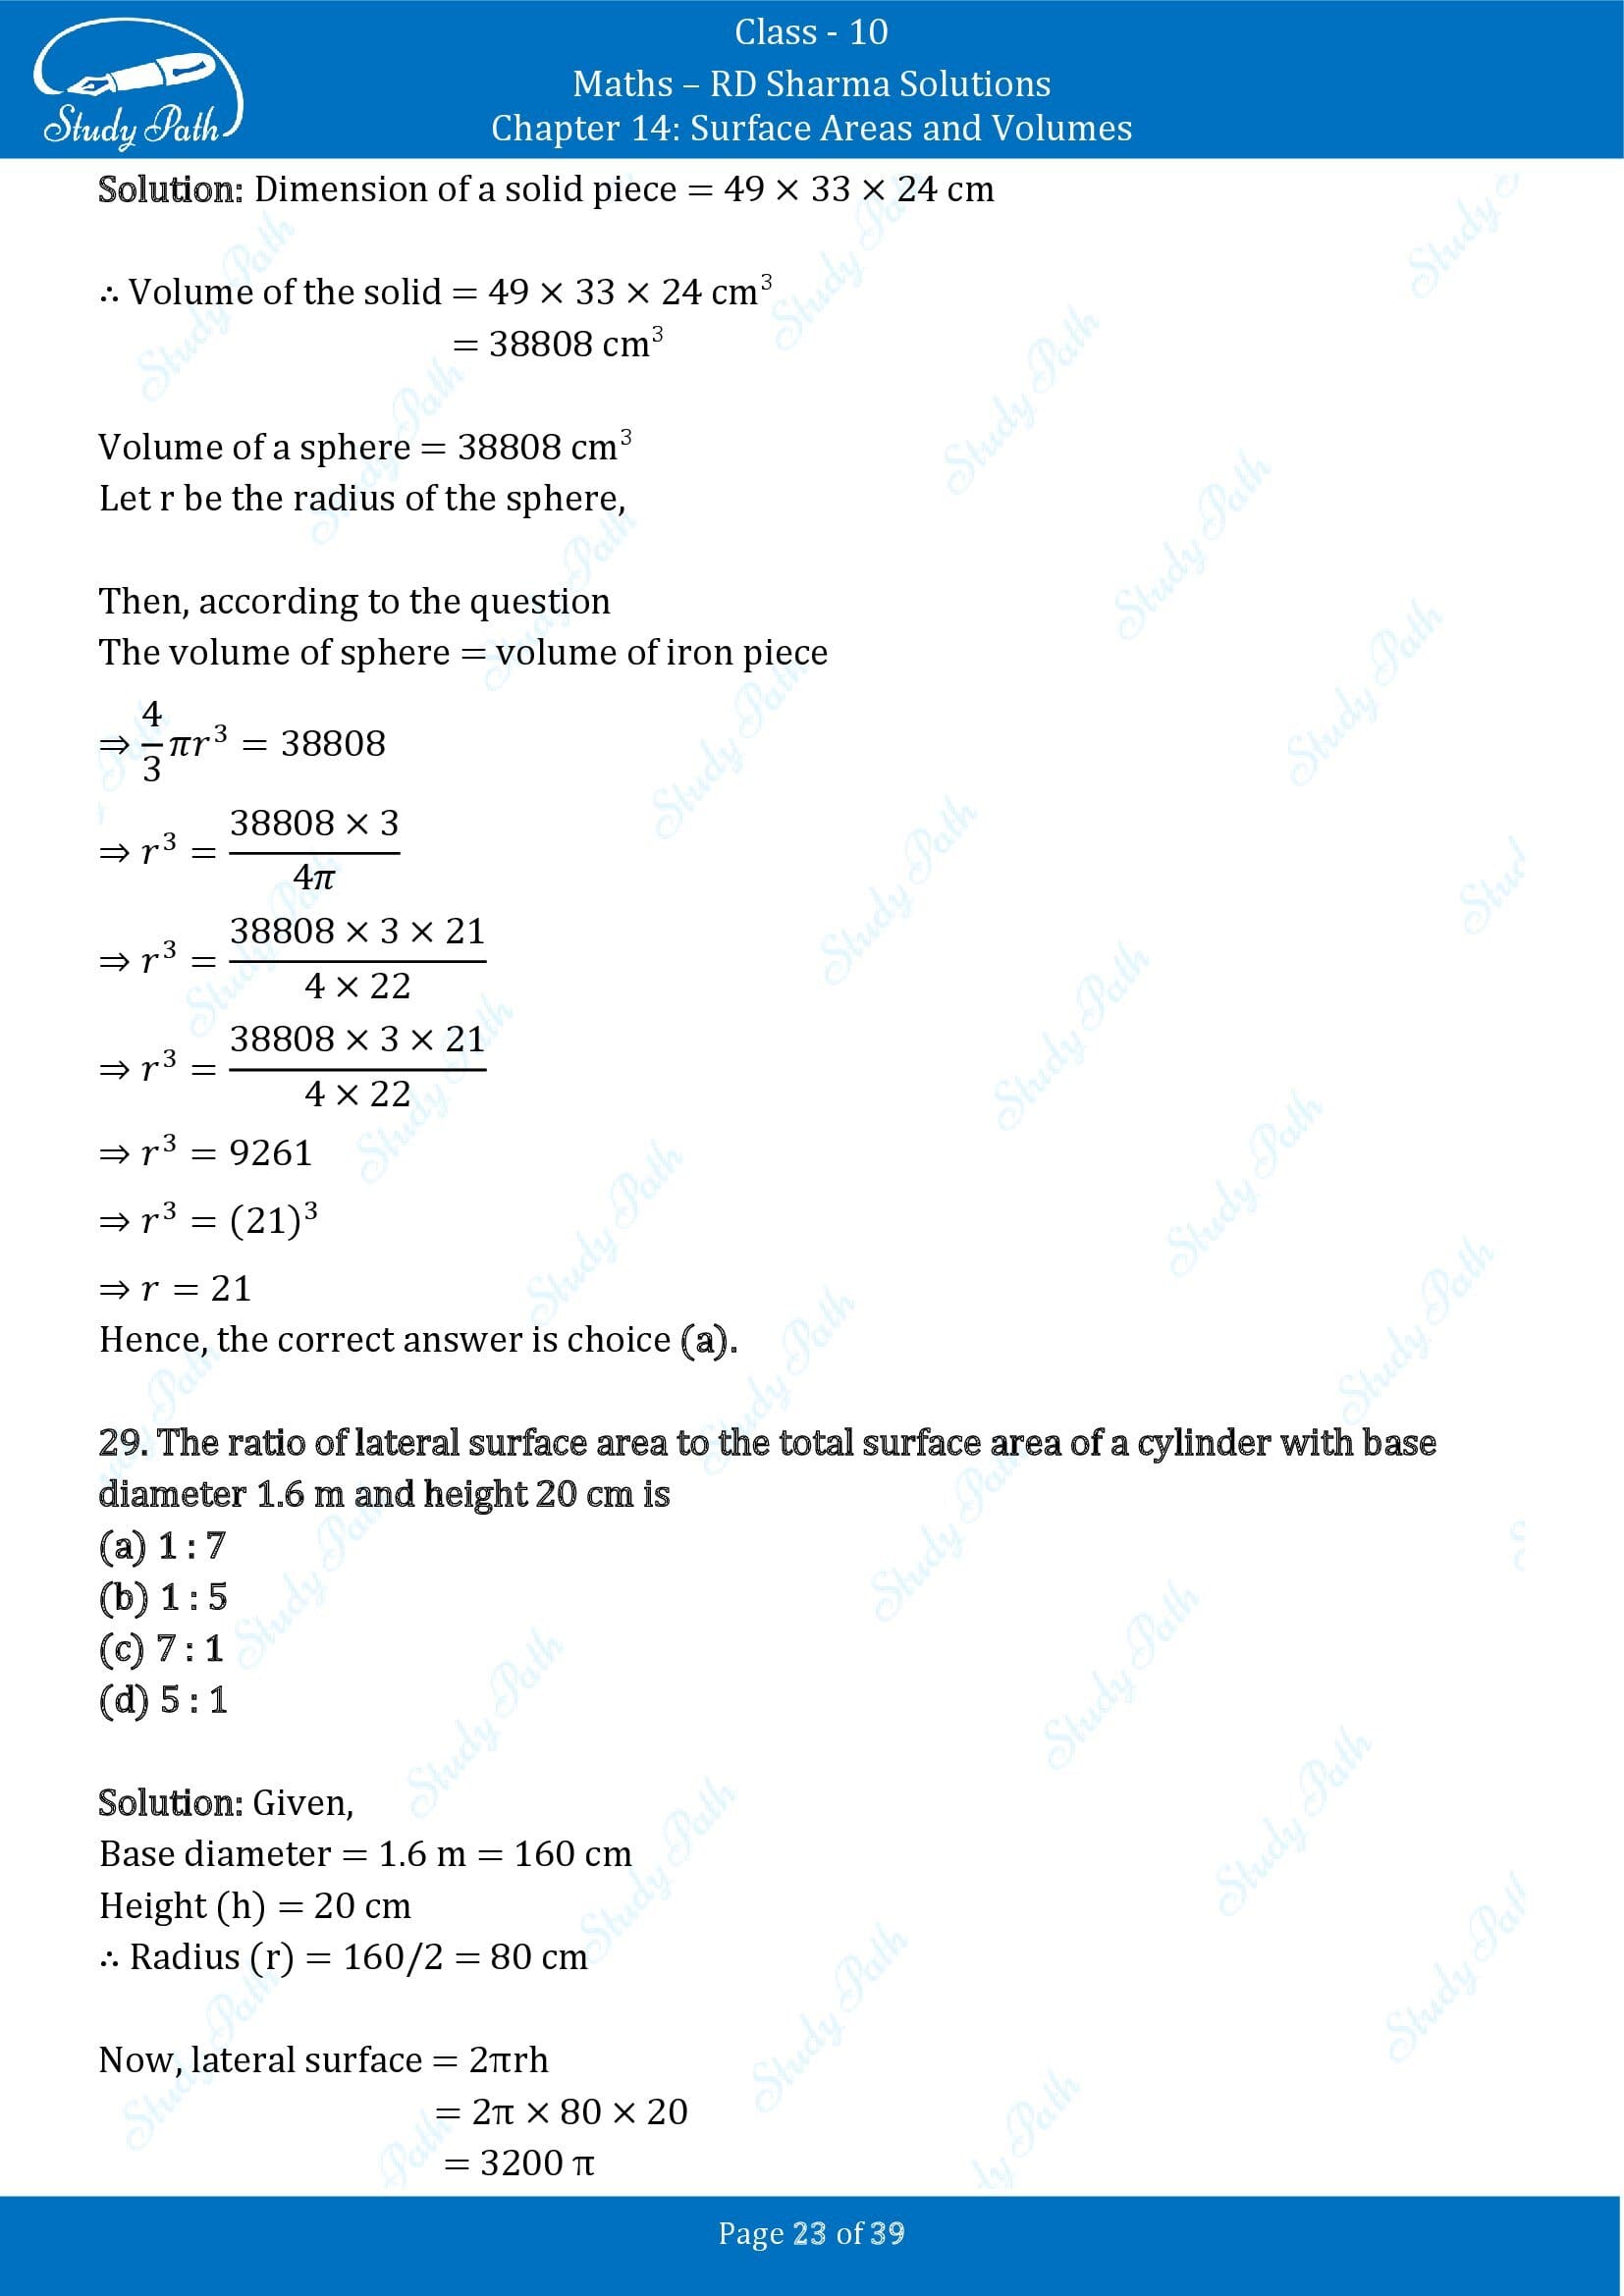 RD Sharma Solutions Class 10 Chapter 14 Surface Areas and Volumes Multiple Choice Question MCQs 00023